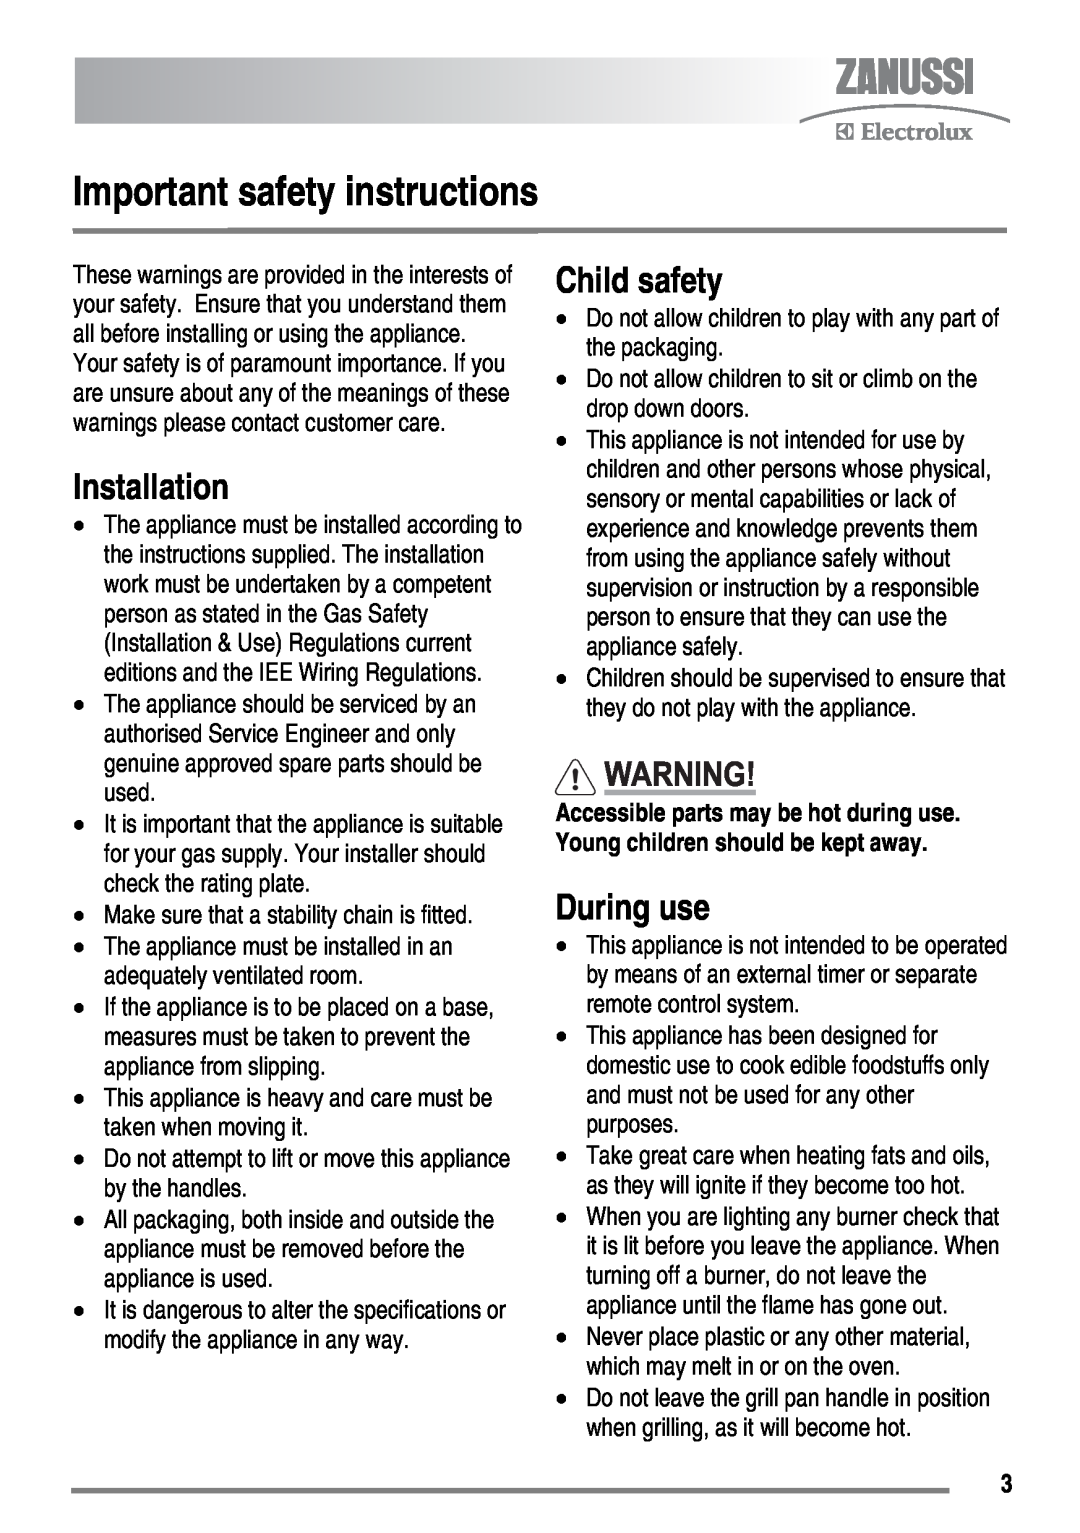 Zanussi FH10 user manual Important safety instructions, Installation, Child safety, During use 